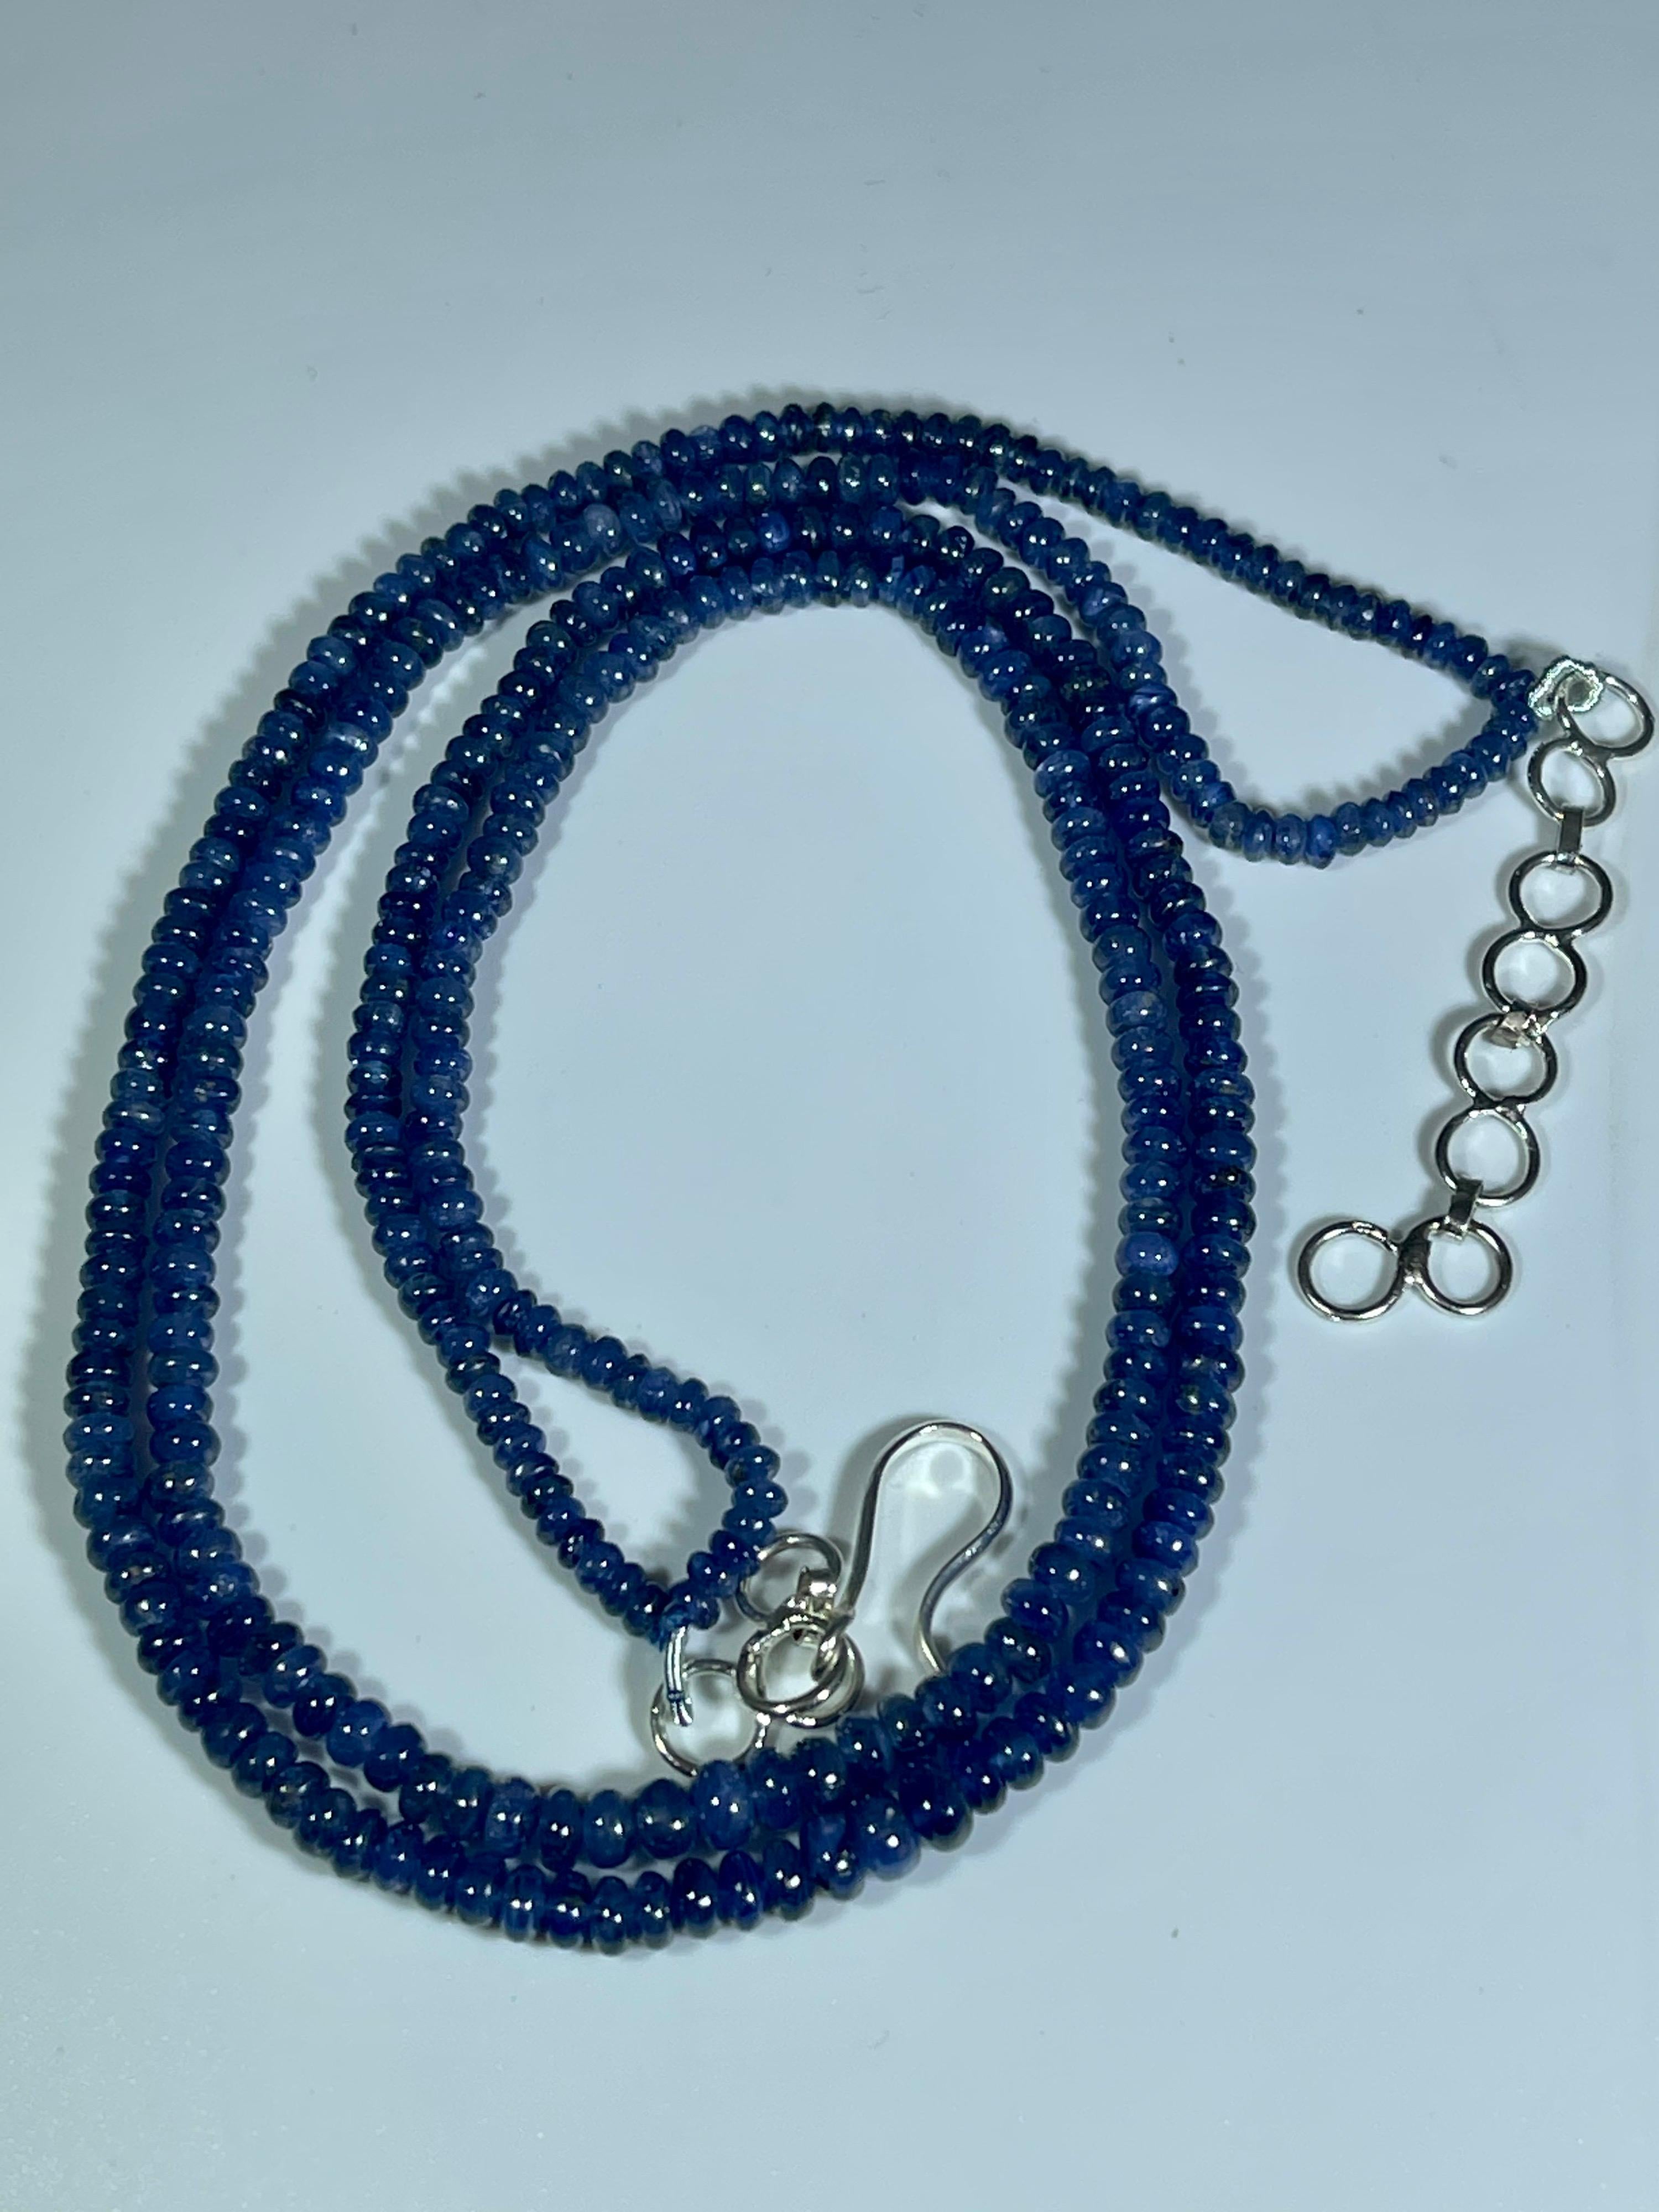 105 Carat Natural Sapphire Bead Two-Strand Necklace Sterling Silver Clasp For Sale 7